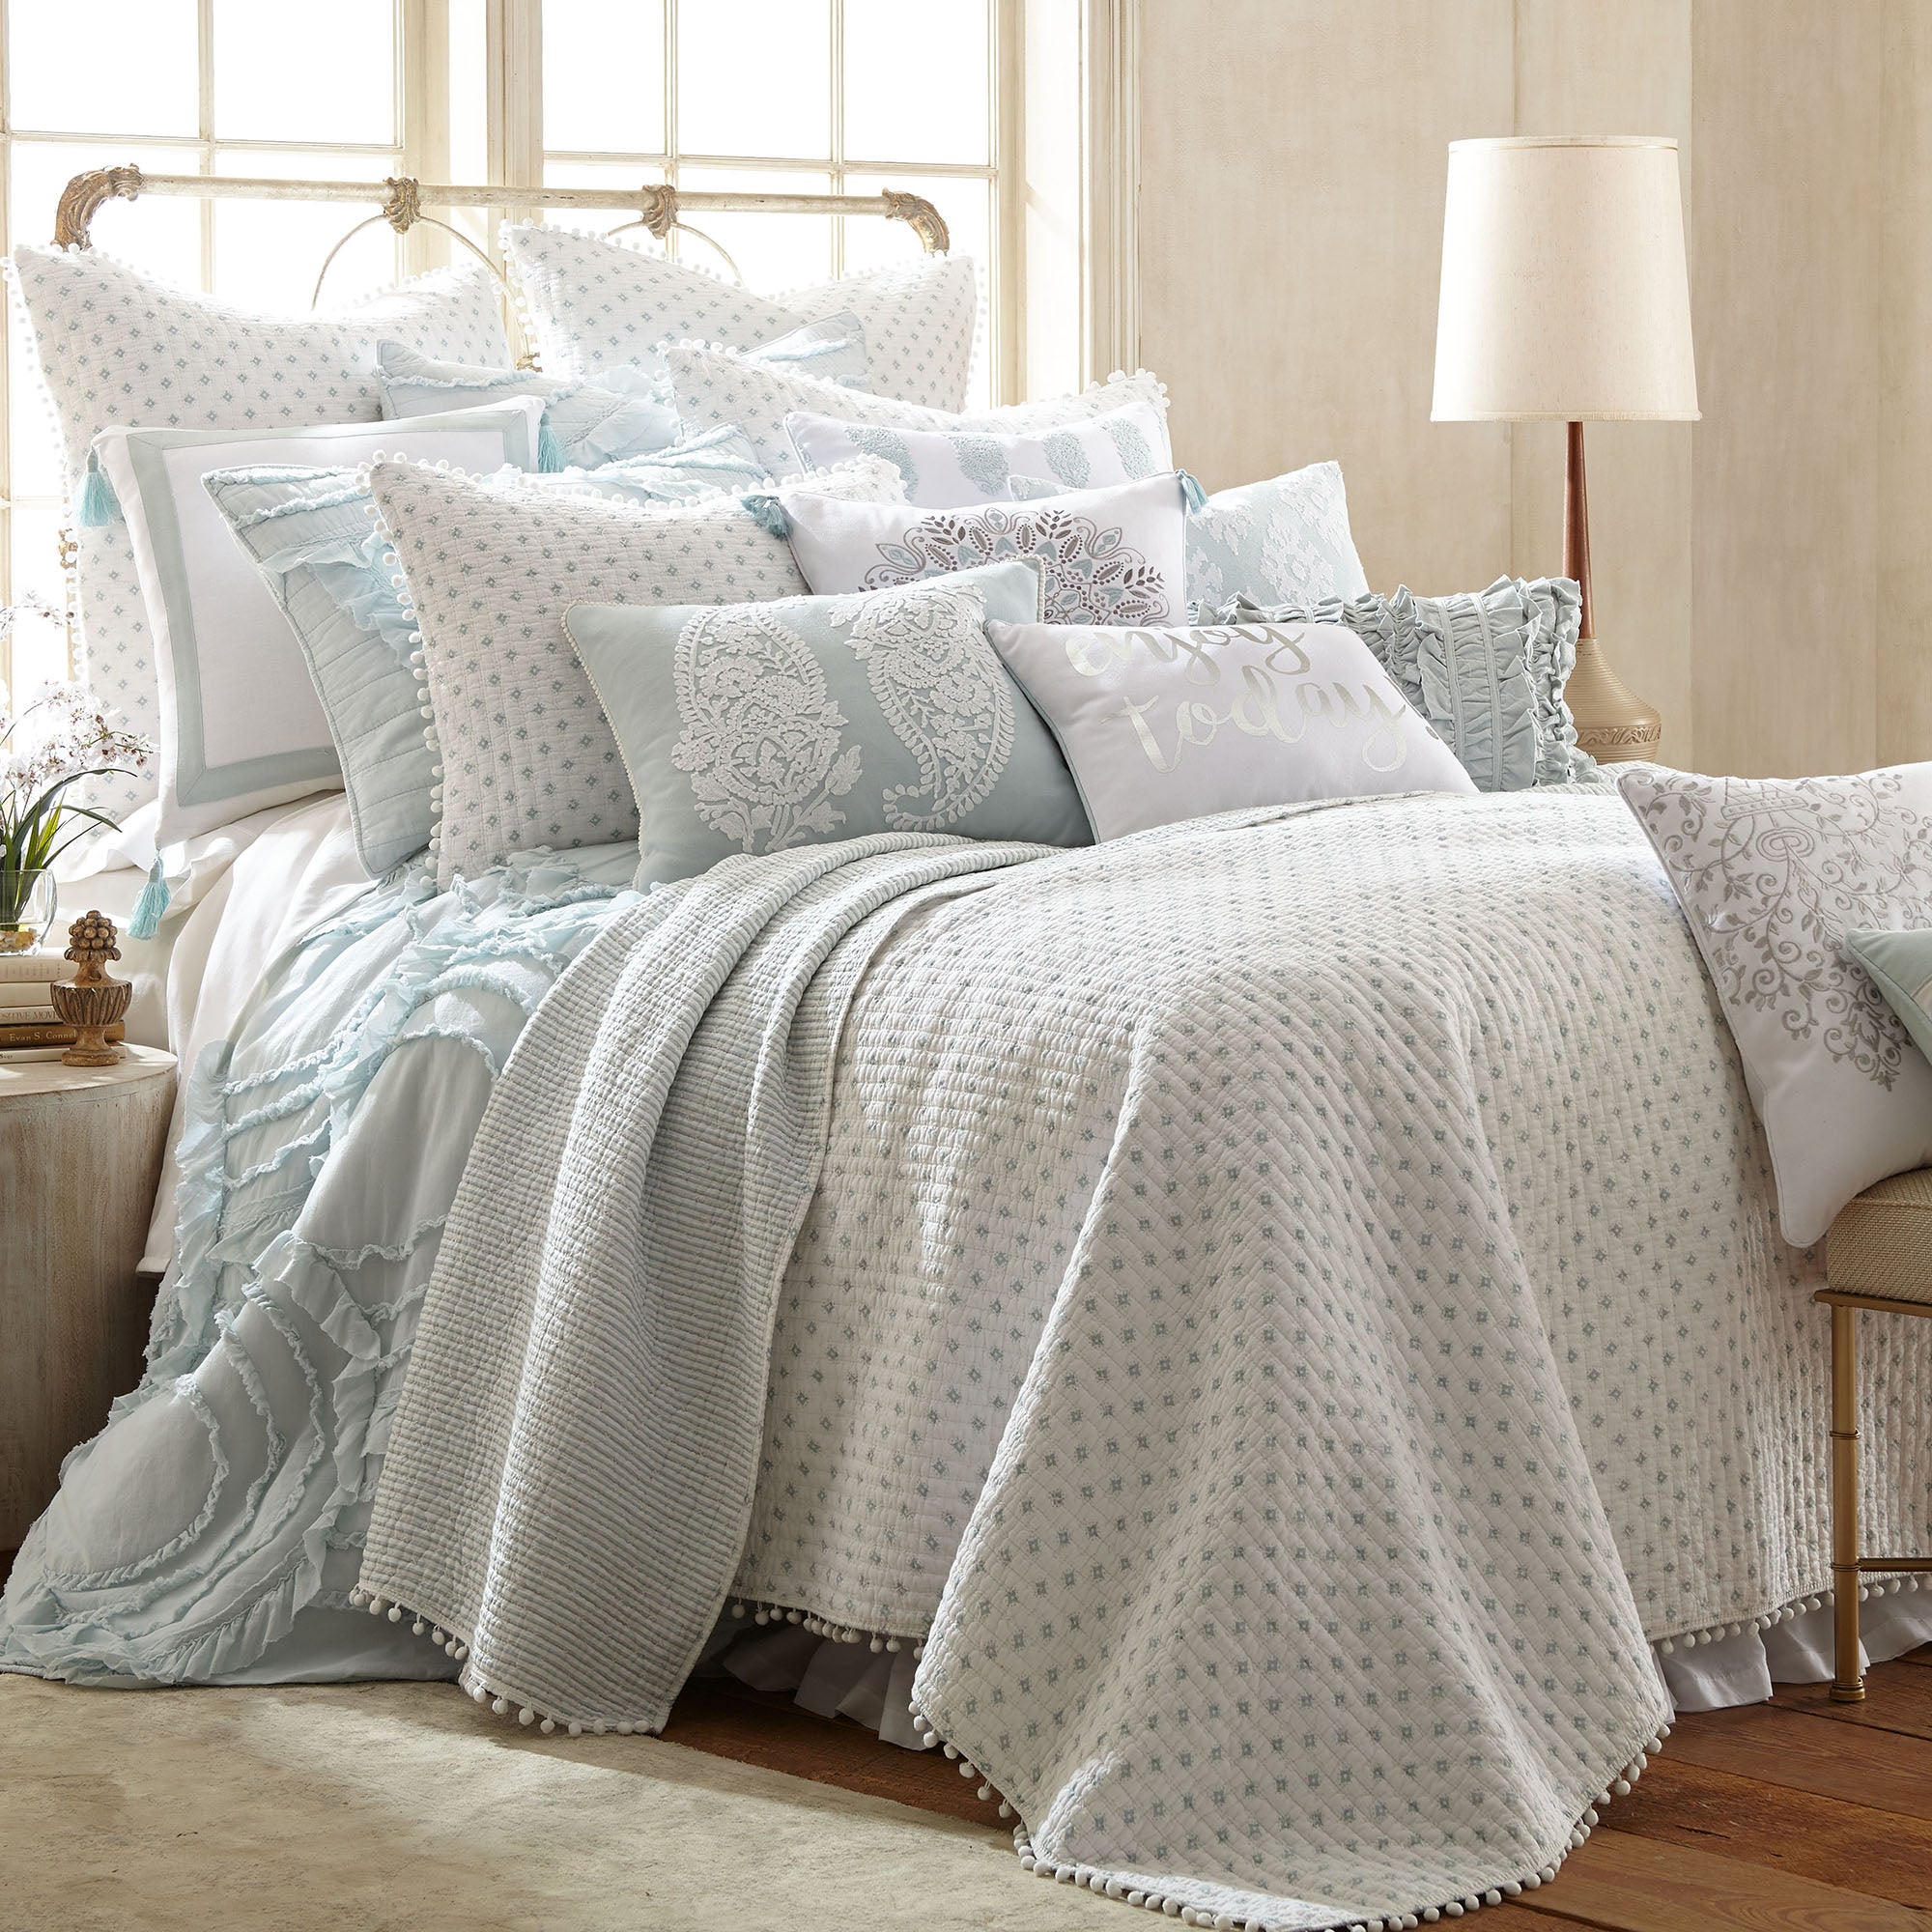 Ditsy Spa Quilt Set